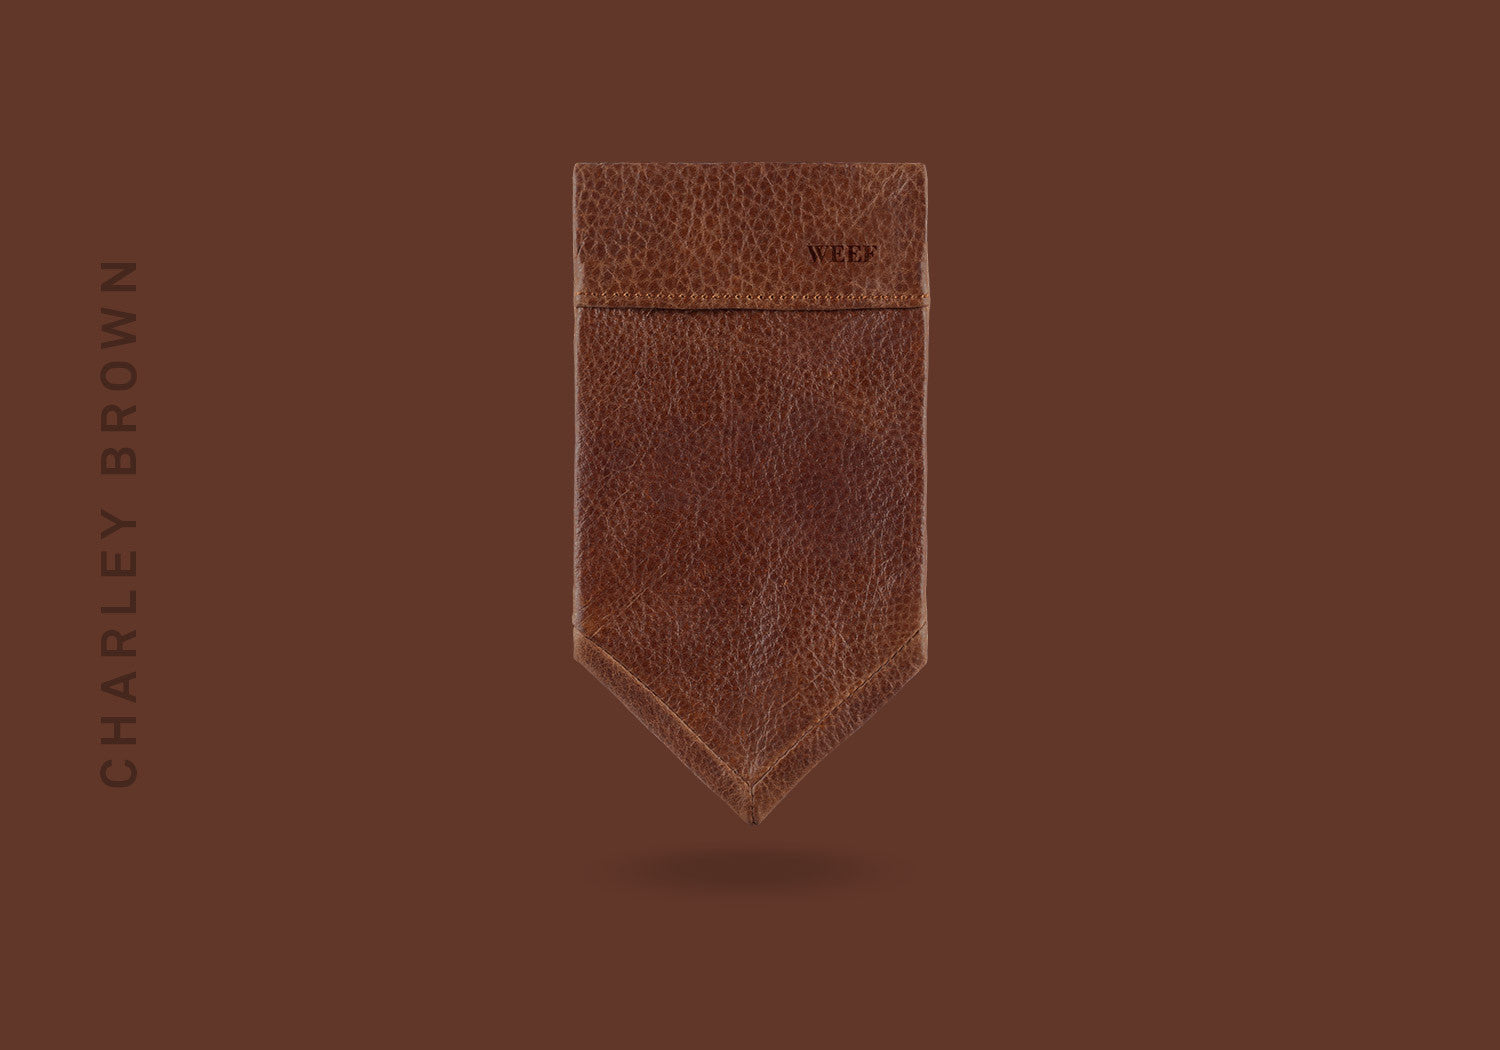 This charley brown WEEF handmade leather pocket square is a great present or gift idea for dapper and stylish gentlemen for fathers day, valentines day or Christmas.